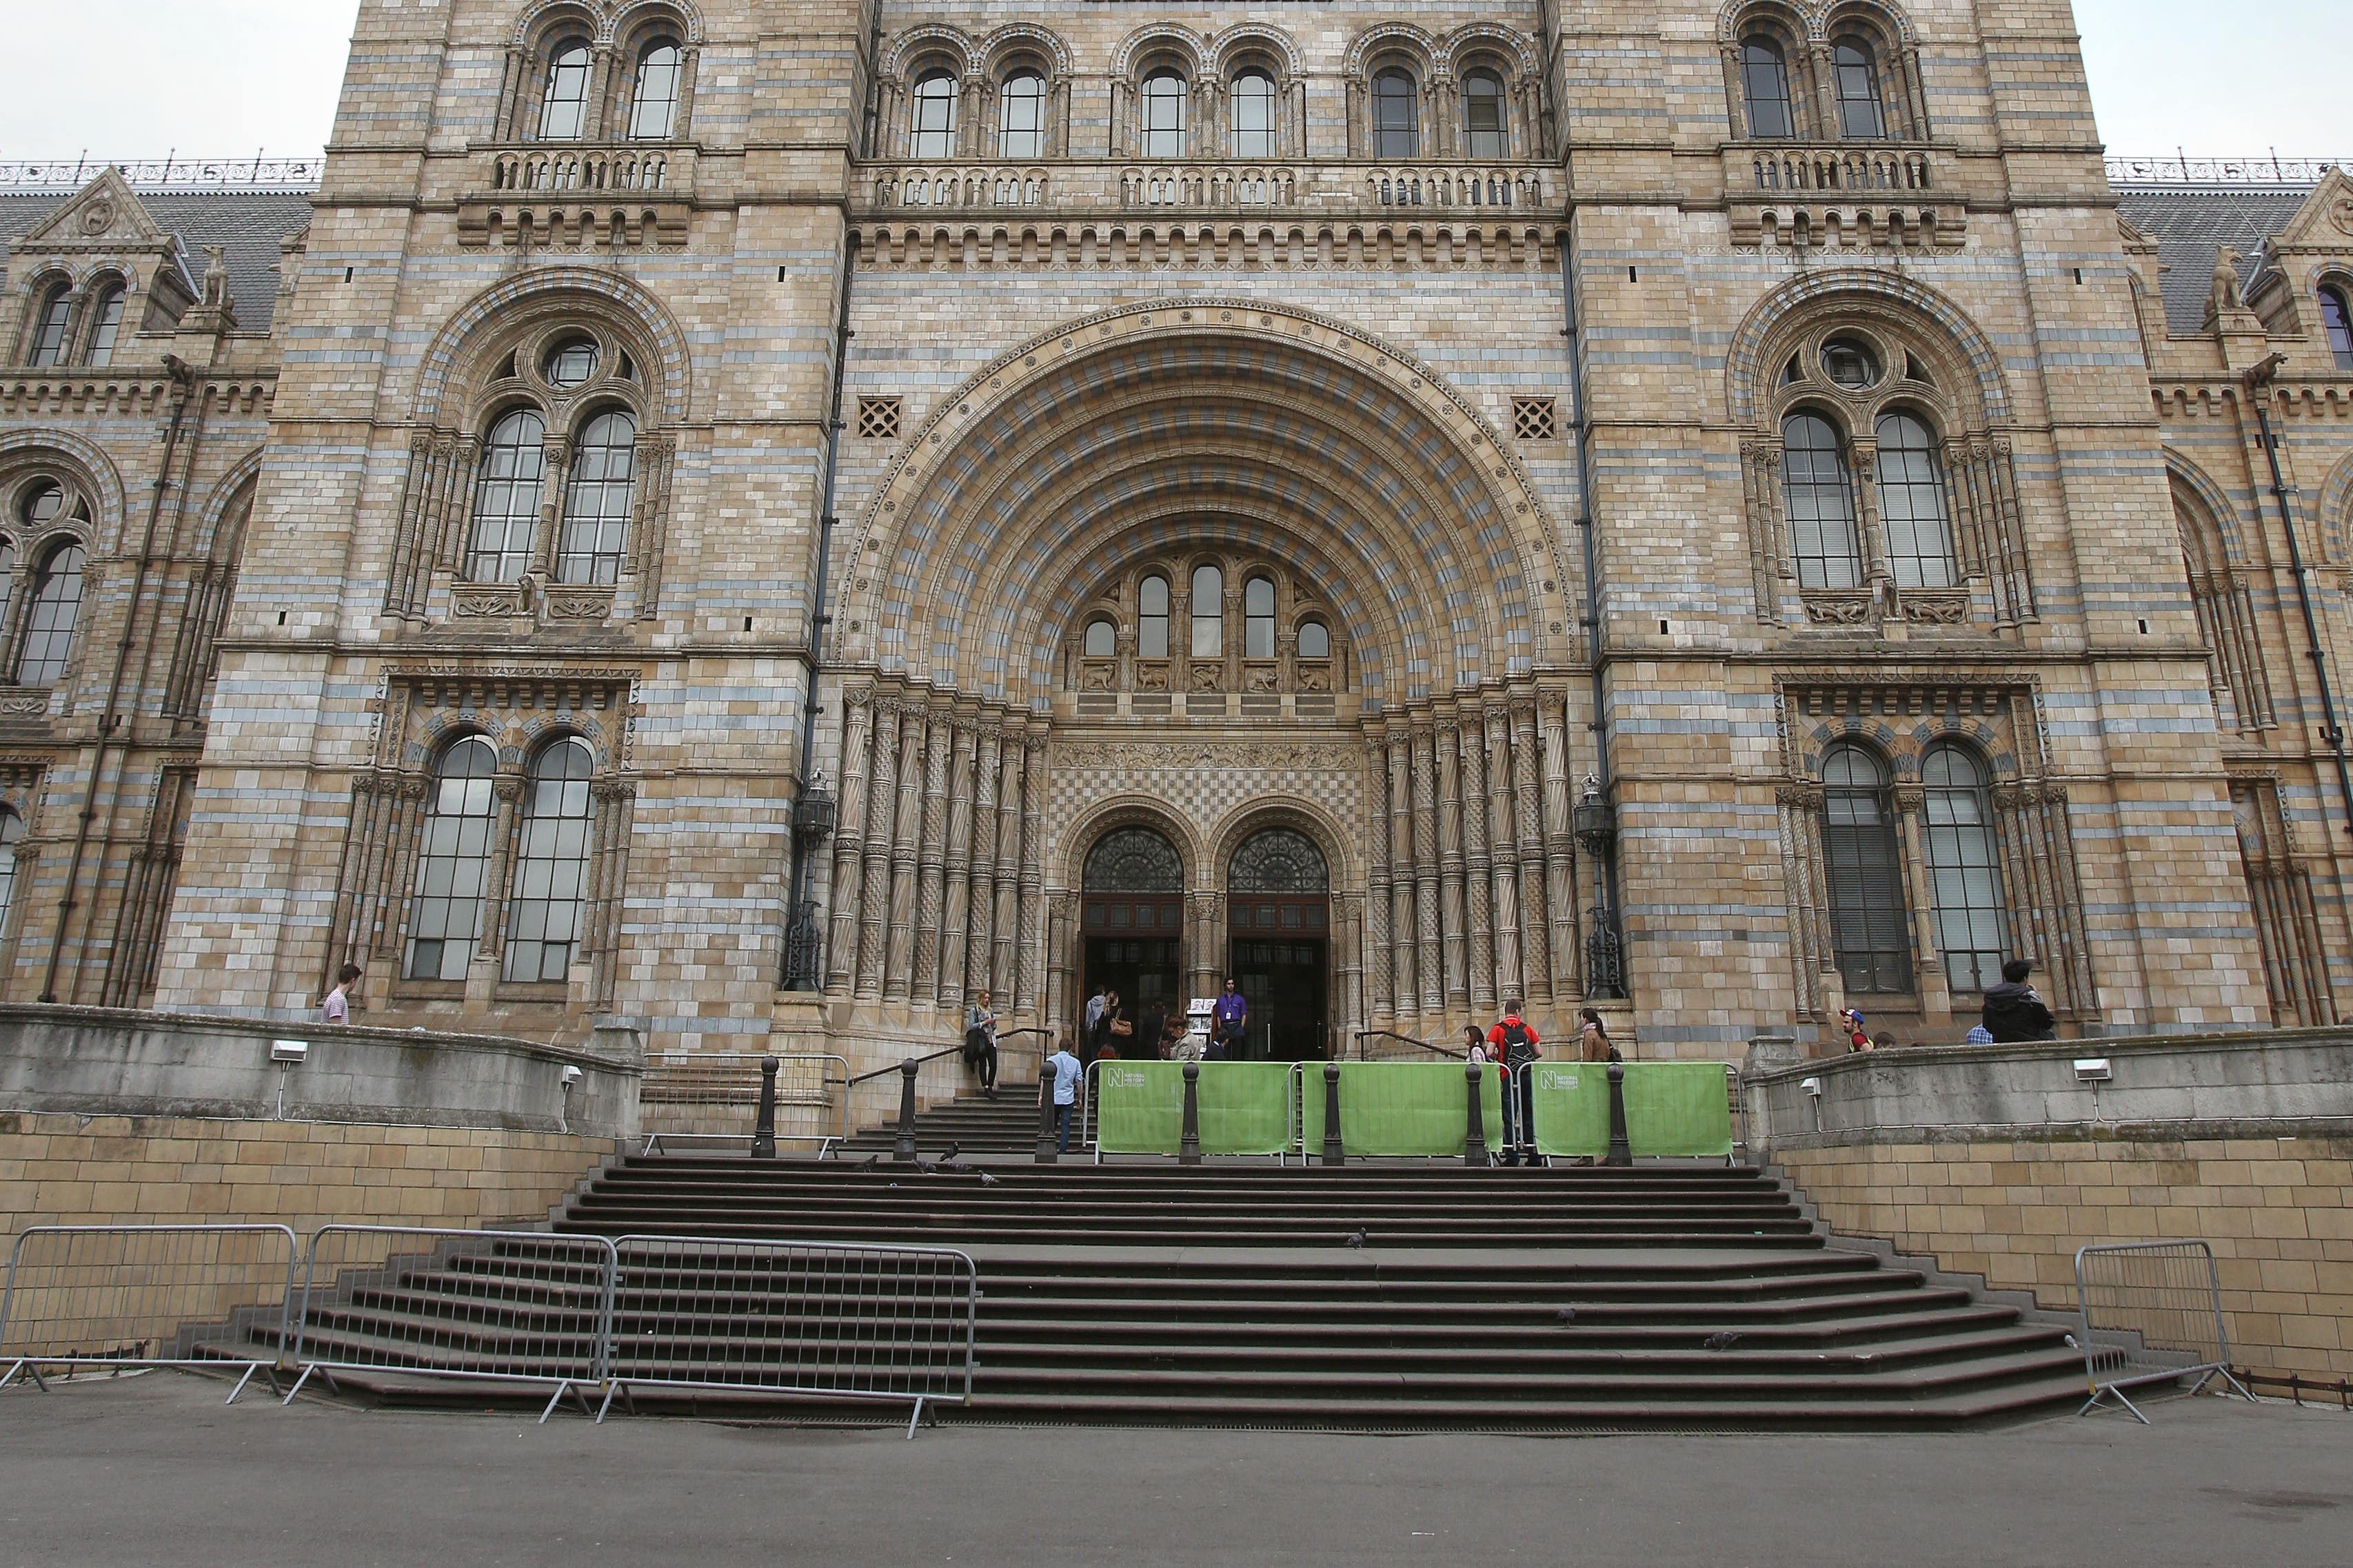 The Natural History Museum disclosed 13 items had gone missing over the last five years